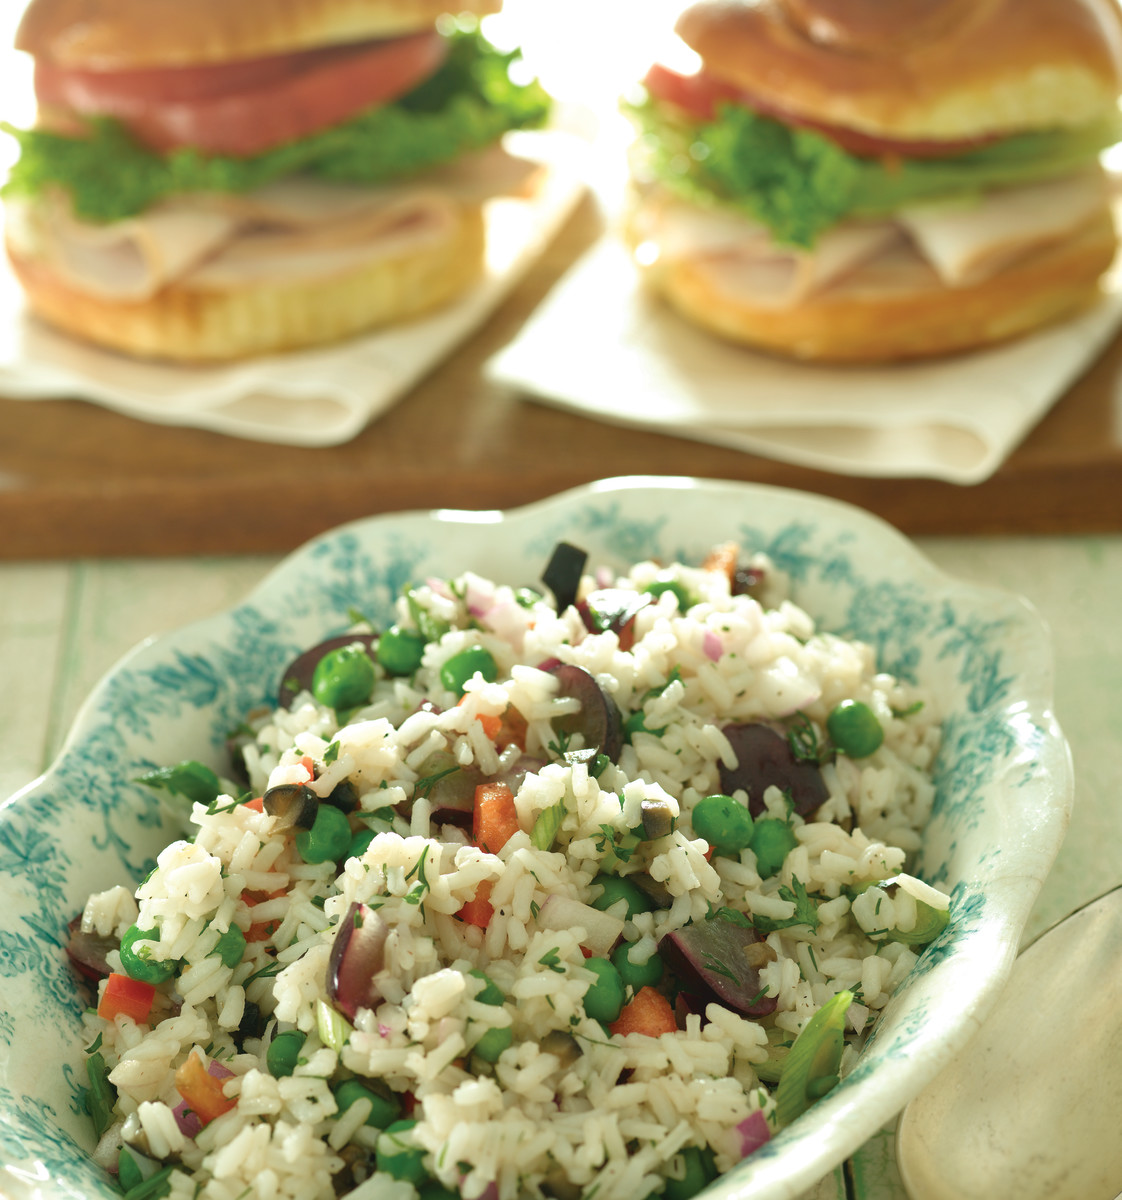 Smoked Turkey on Challah Rolls with Colorful Rice Salad